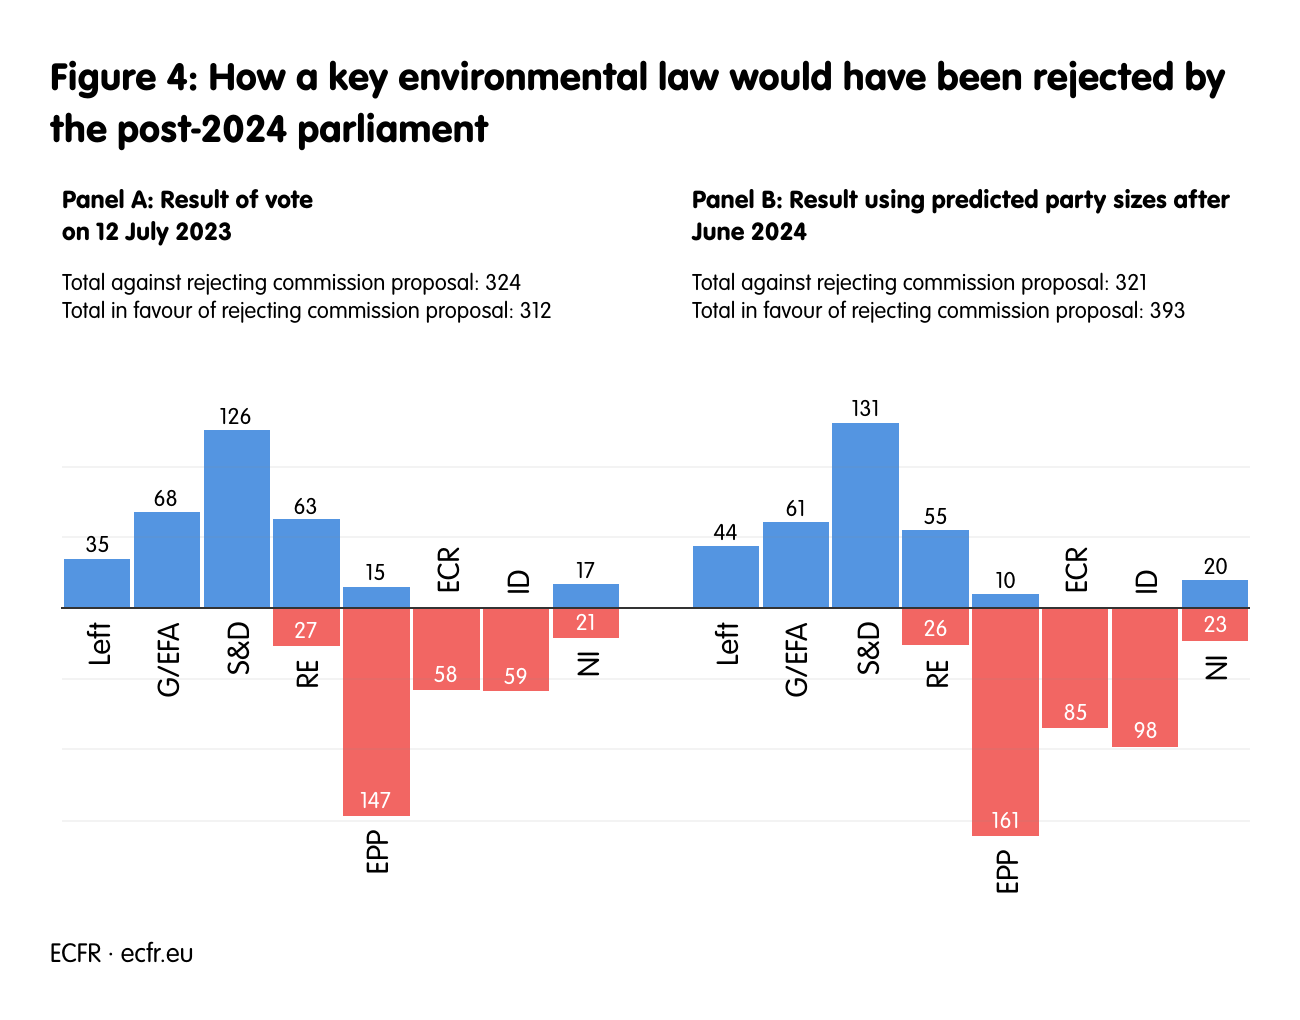 Figure 4: How a key environmental law would have been rejected by the post-2024 parliament